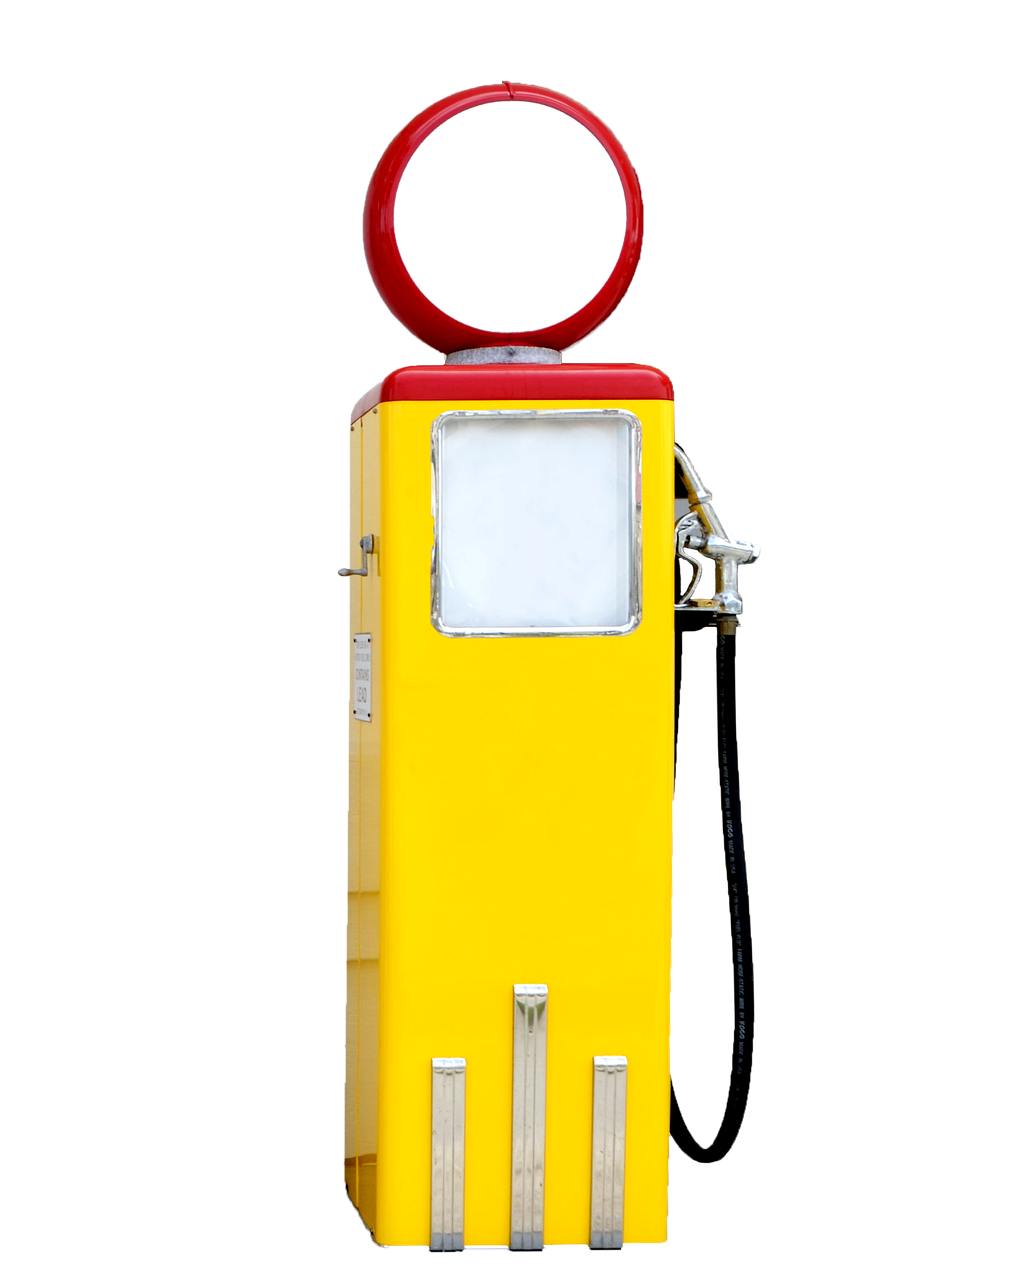 gas pump red yellow free photo